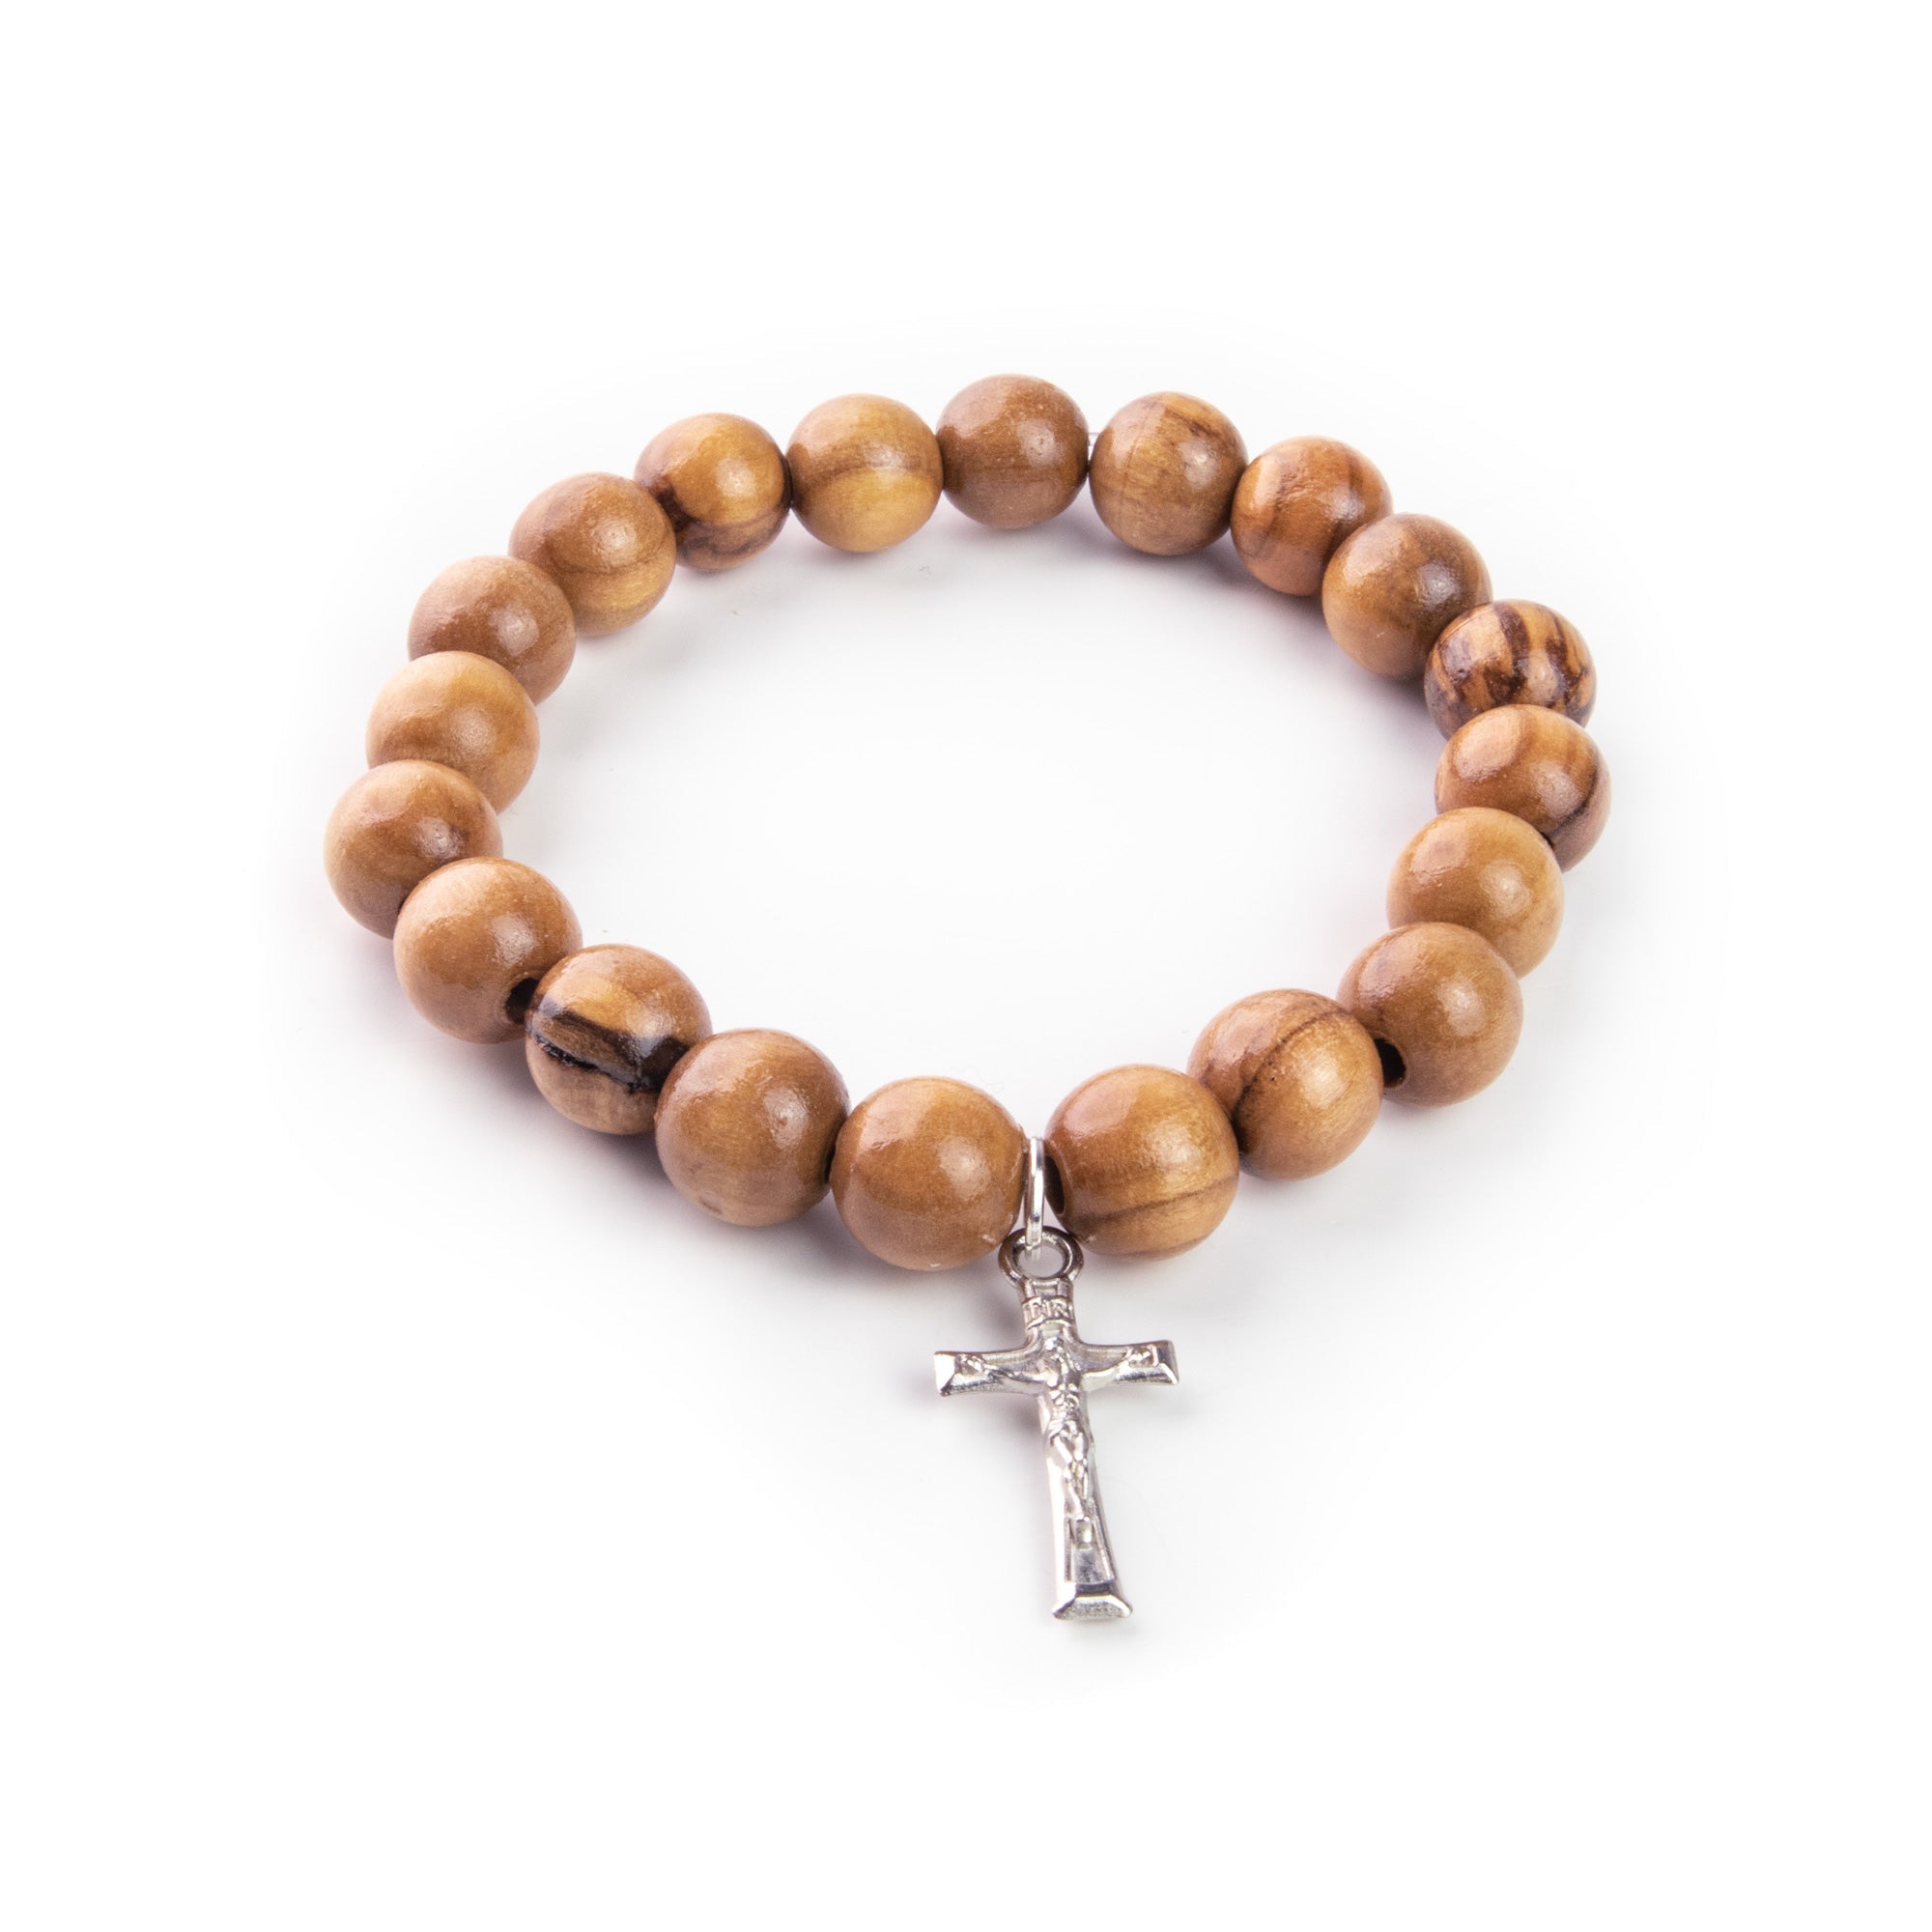 2 Decade Bracelet with Large 1cm Olive Wood Beads and Crucifix Dangle in Velvet Box